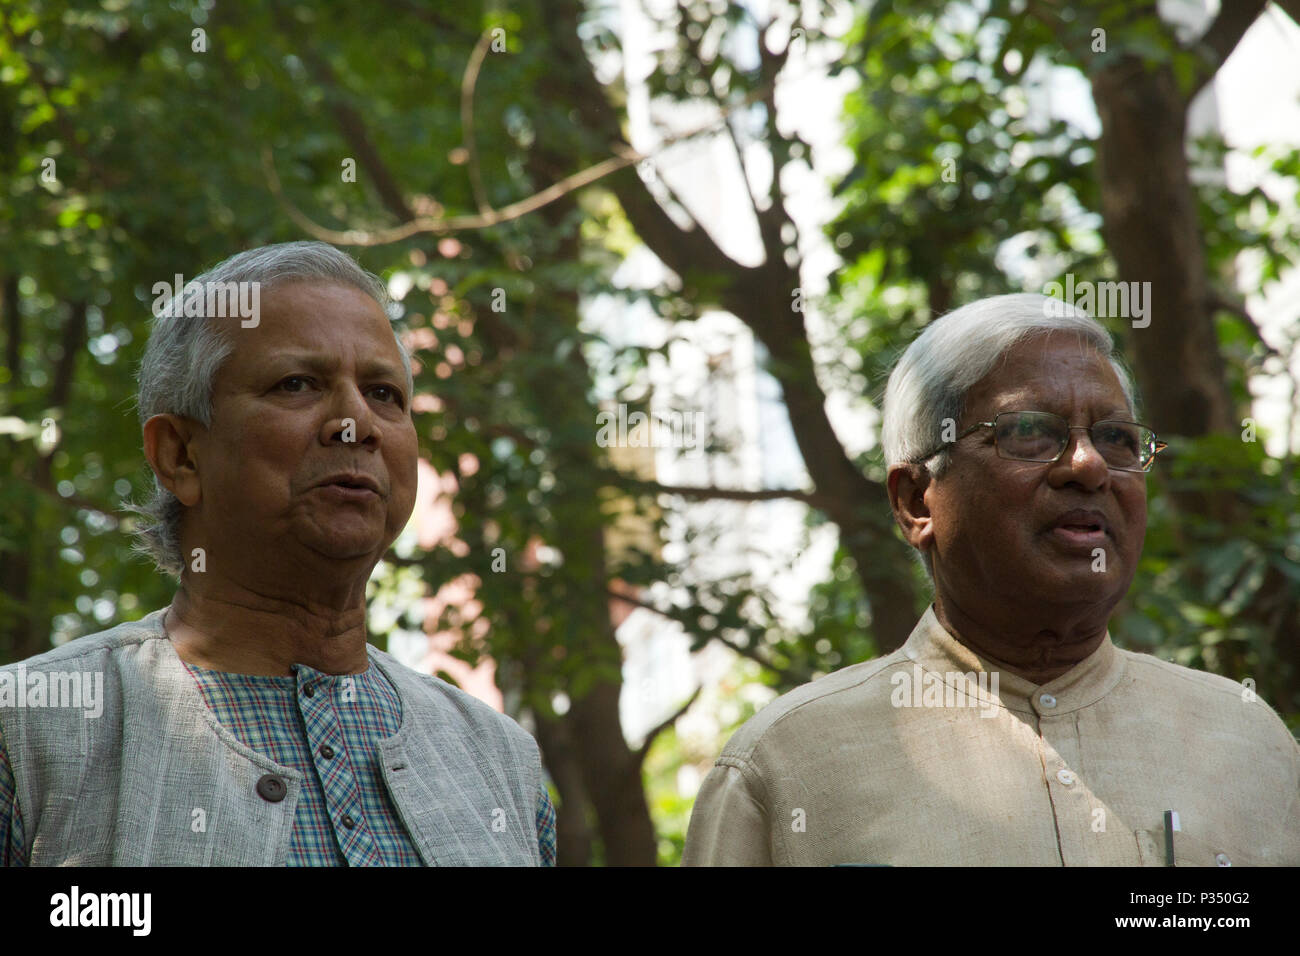 Nobel Laureate Professor Muhammad Yunus, he founded the Grameen Bank and Sir Fazle Hasan Abed the founder and chairman of BRAC. Stock Photo